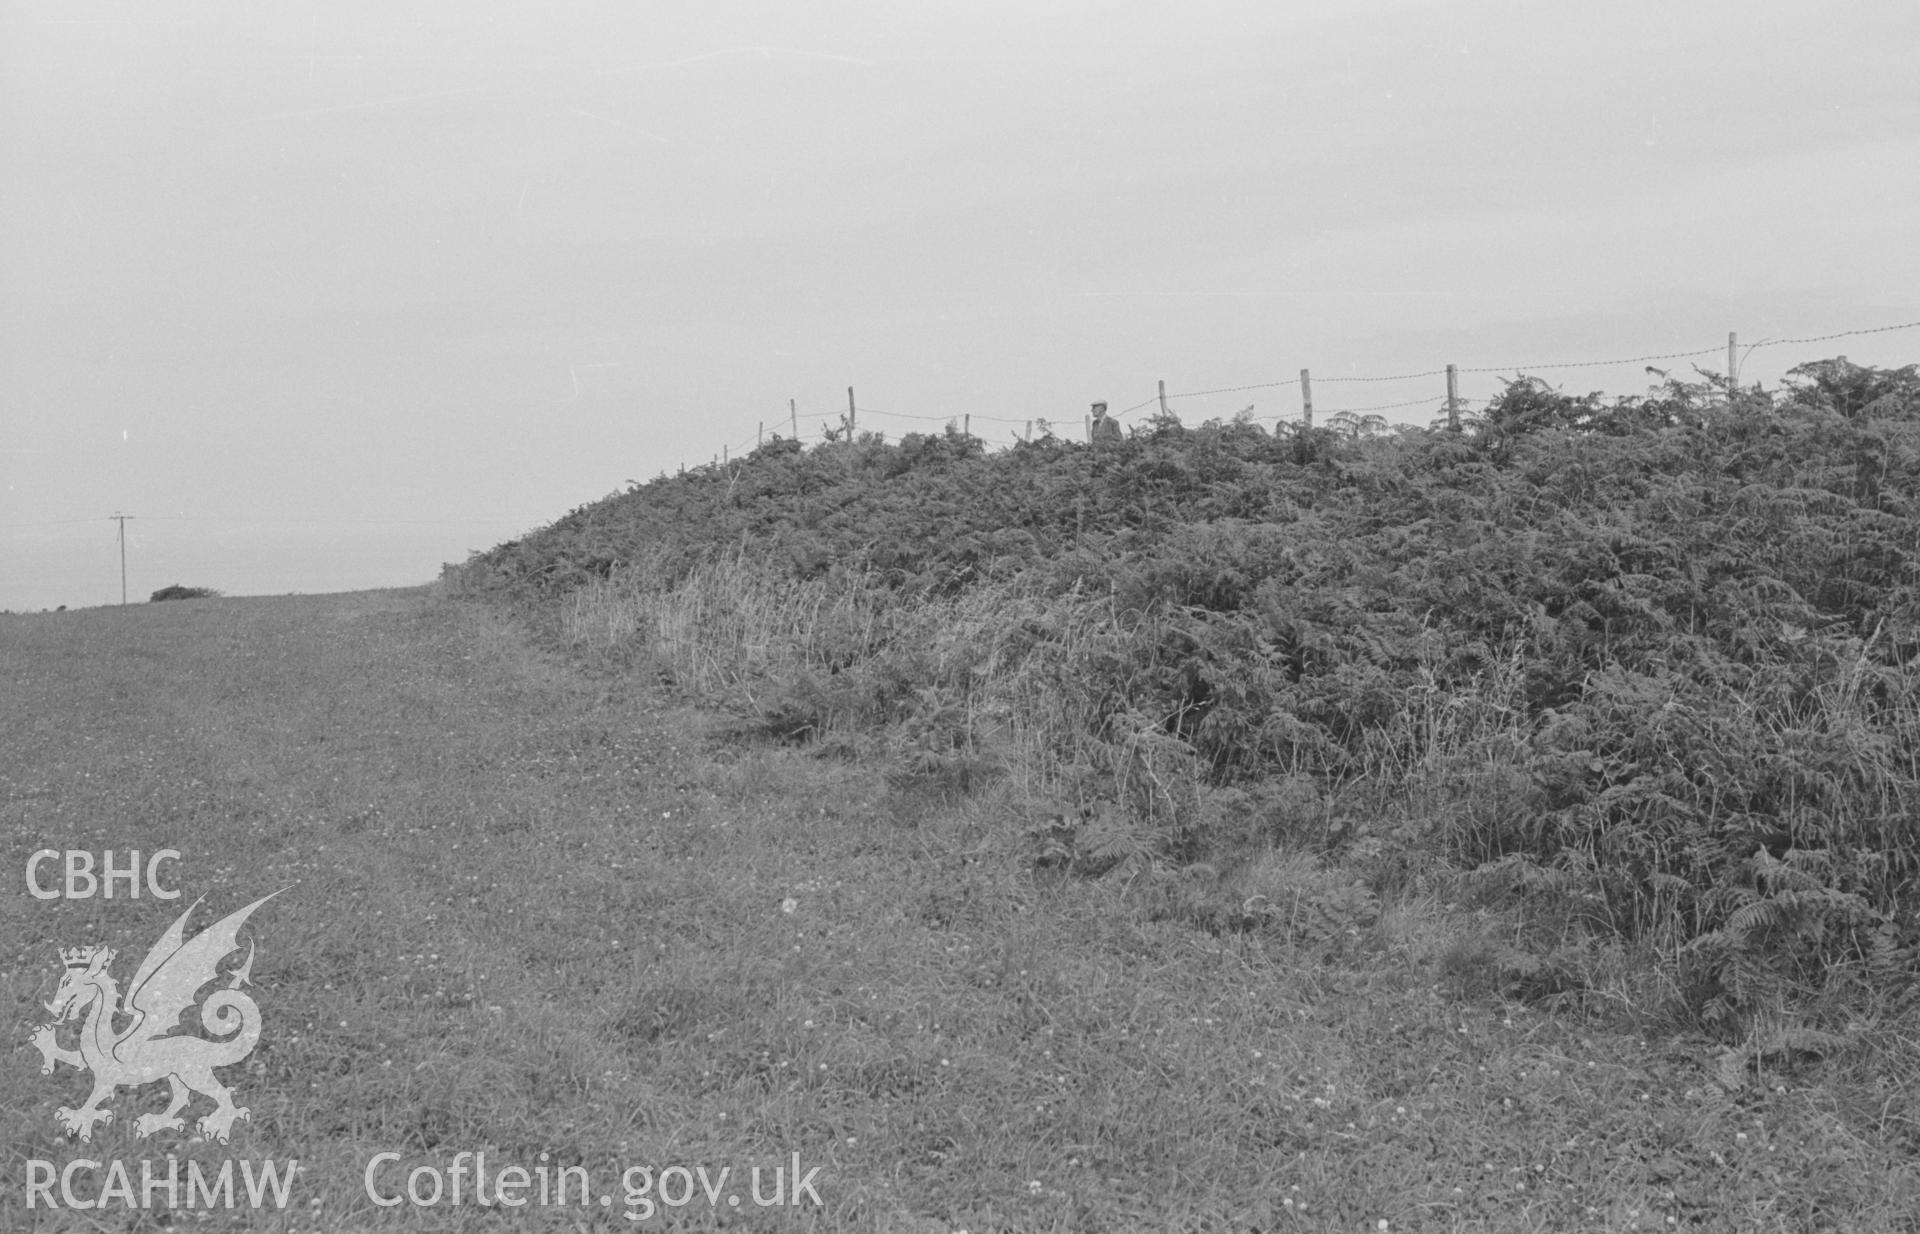 Digital copy of a black and white negative showing outer rampart on the west side of Castell Nadolig hillfort, Cardigan. Photographed in August 1963 by Arthur O. Chater from Grid Reference SN 2974 5034, looking north.